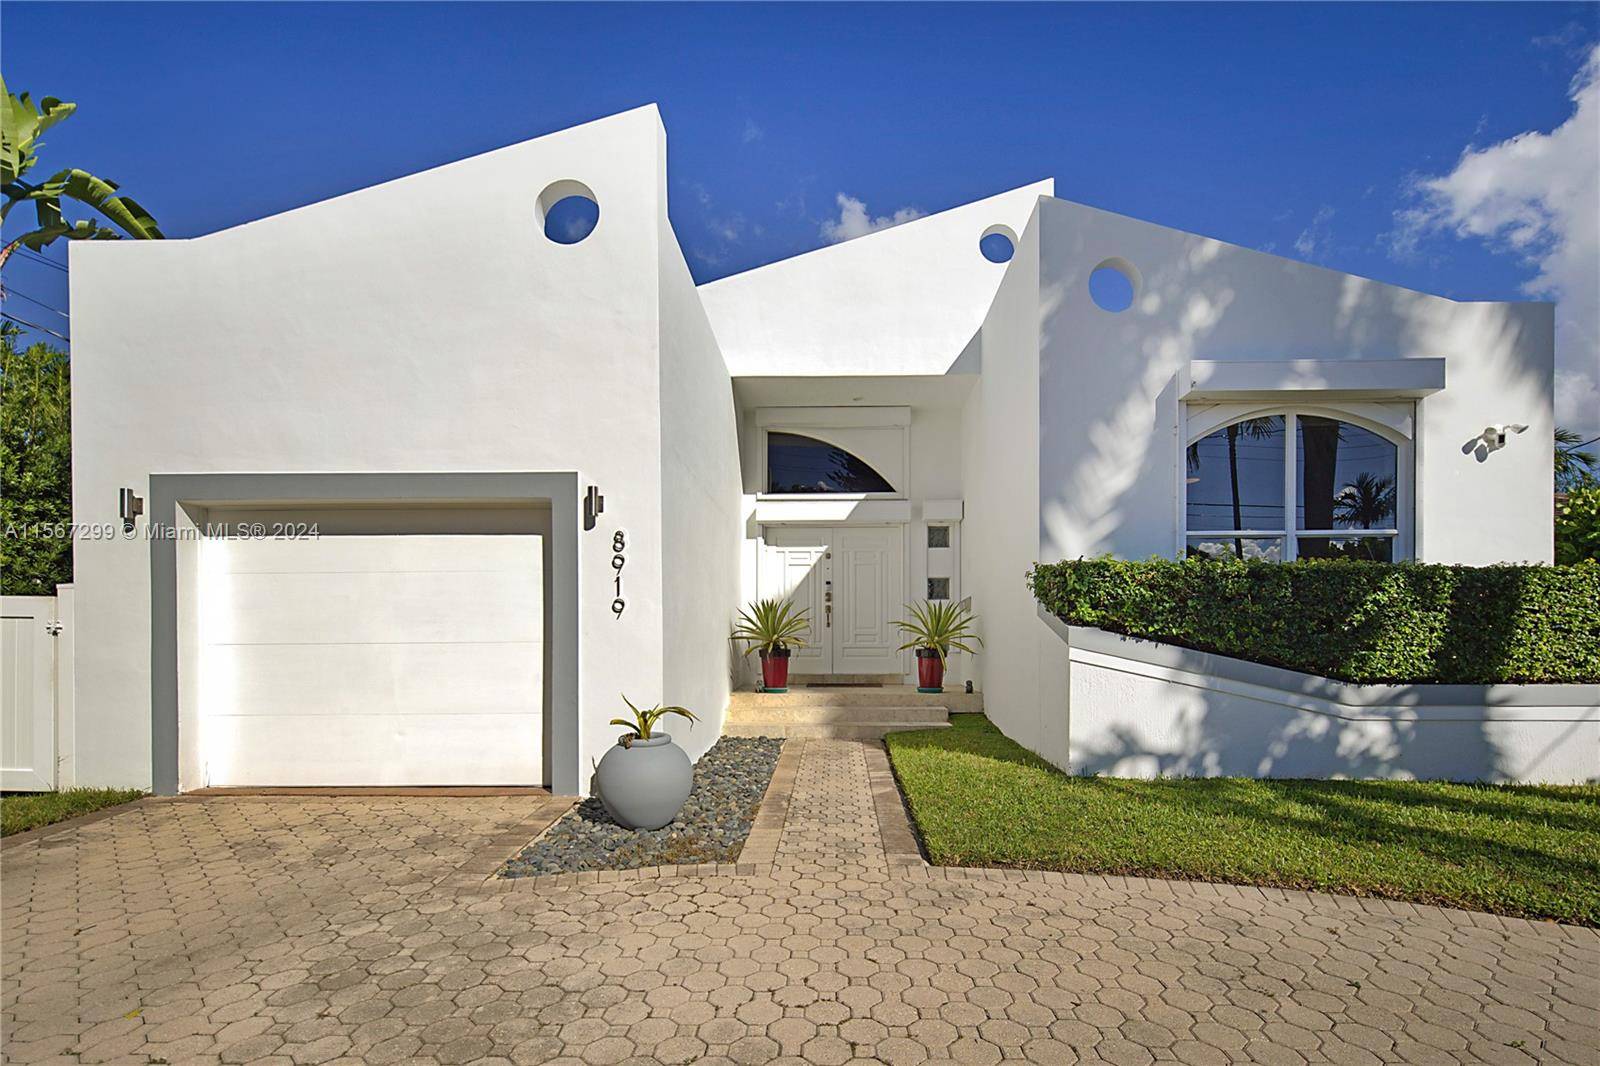 One of newest and best fully furnished homes for rent in the beautiful Surfside community.